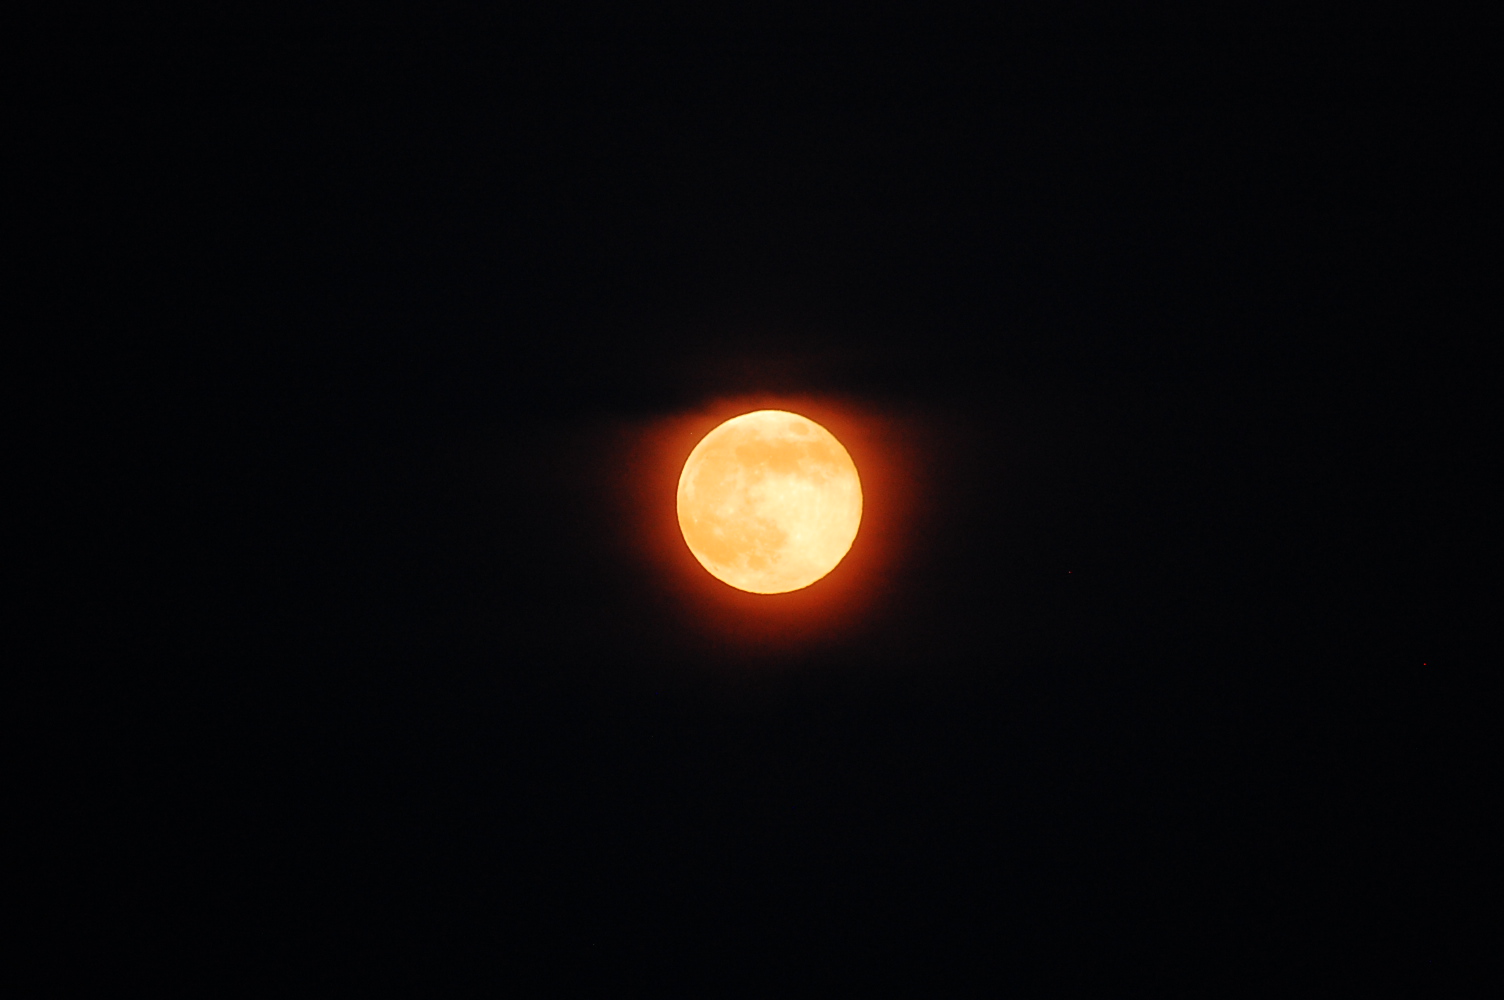 The Moon is on fire